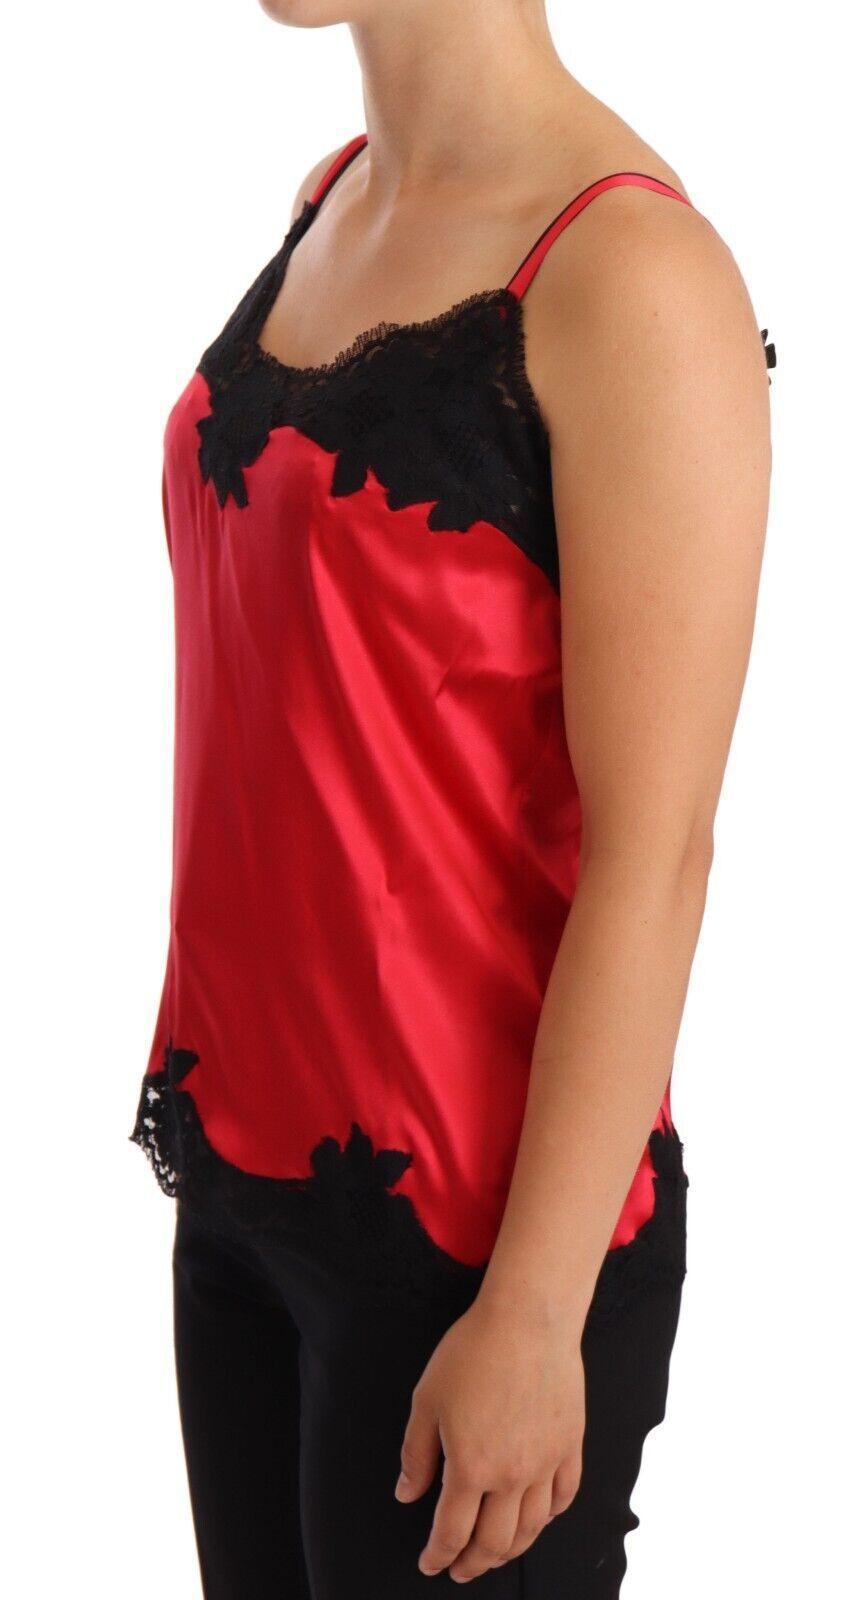 Red Floral Lace Silk Satin Camisole Lingerie Top designed by Dolce & Gabbana available from Moon Behind The Hill 's Clothing > Underwear & Socks > Lingerie > Womens range